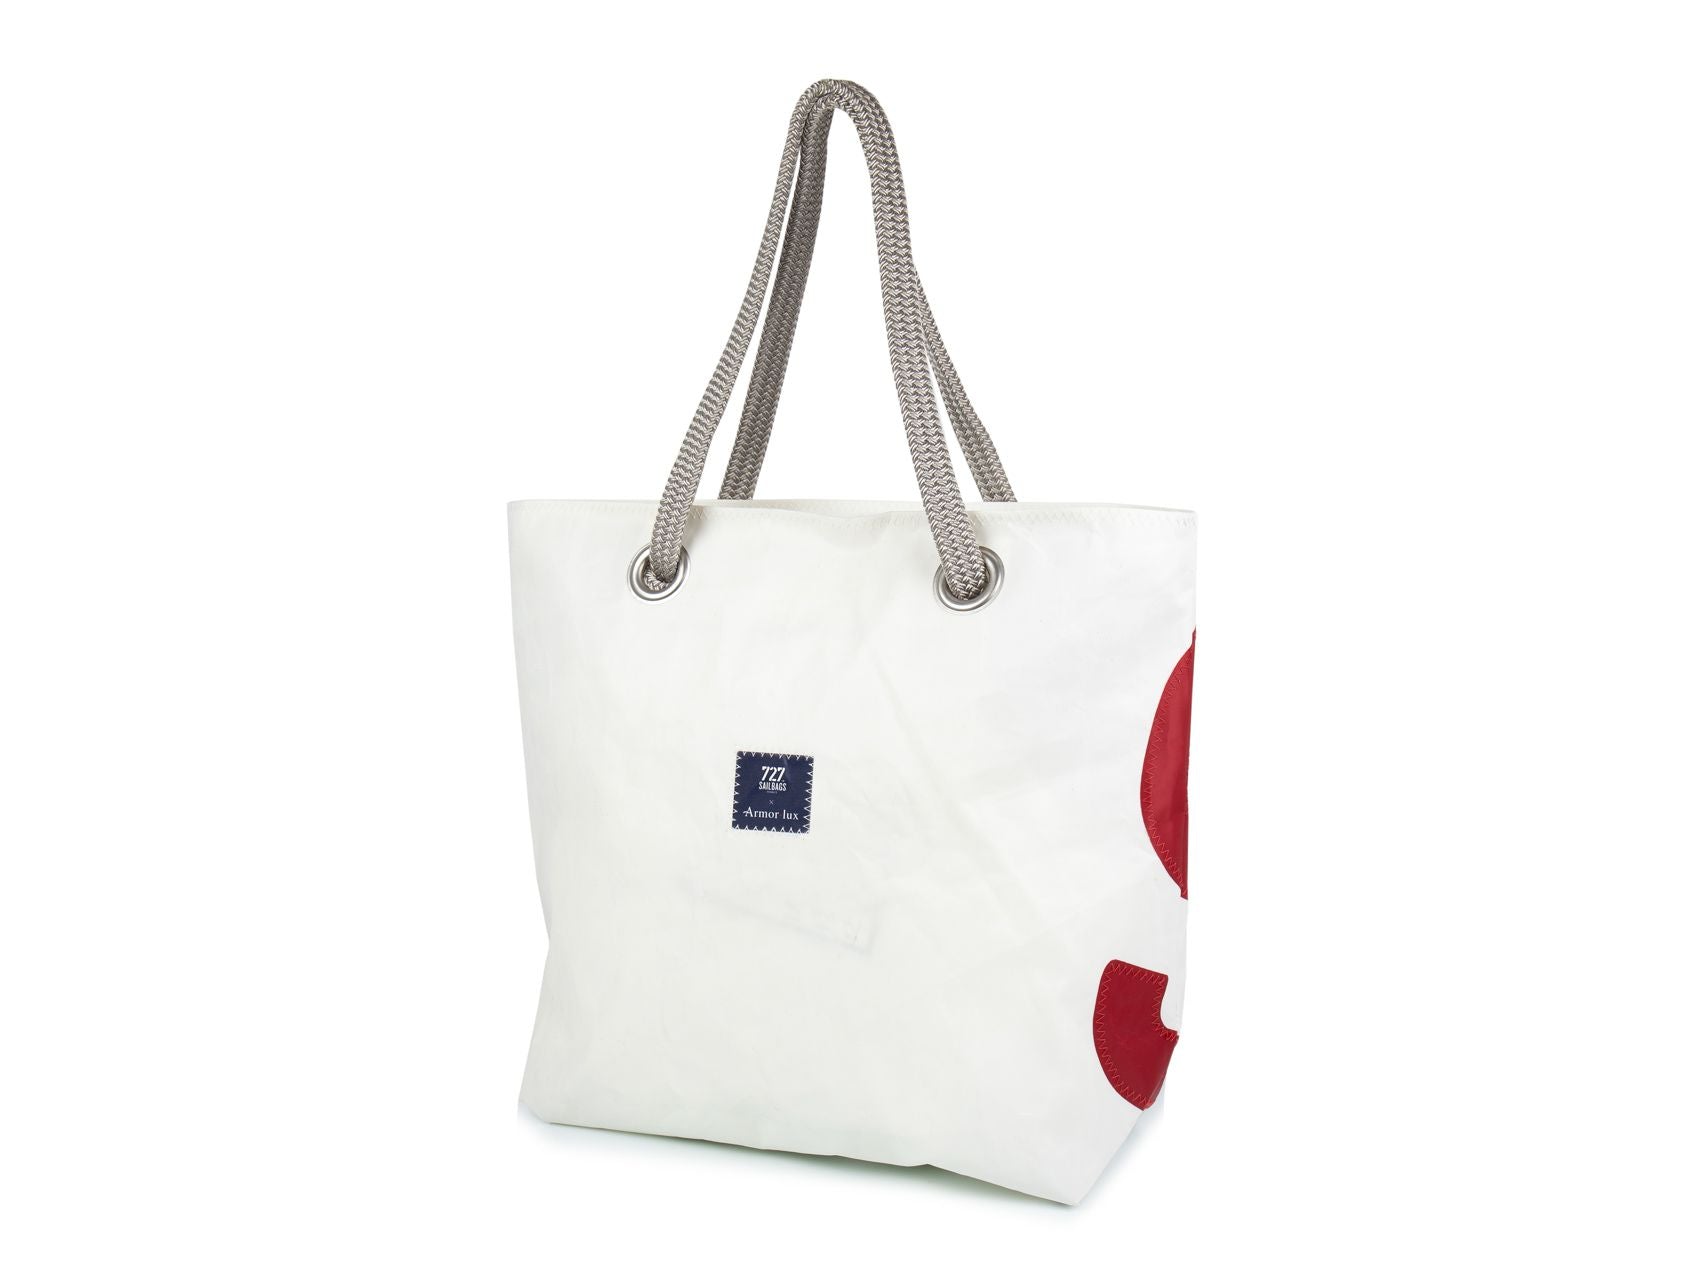 With its blue stripes and red number, this chic and practical tote bag has been sewn by hand from recycled sails and has been designed for lovers of all things nautical and French with a strong sense of style. 